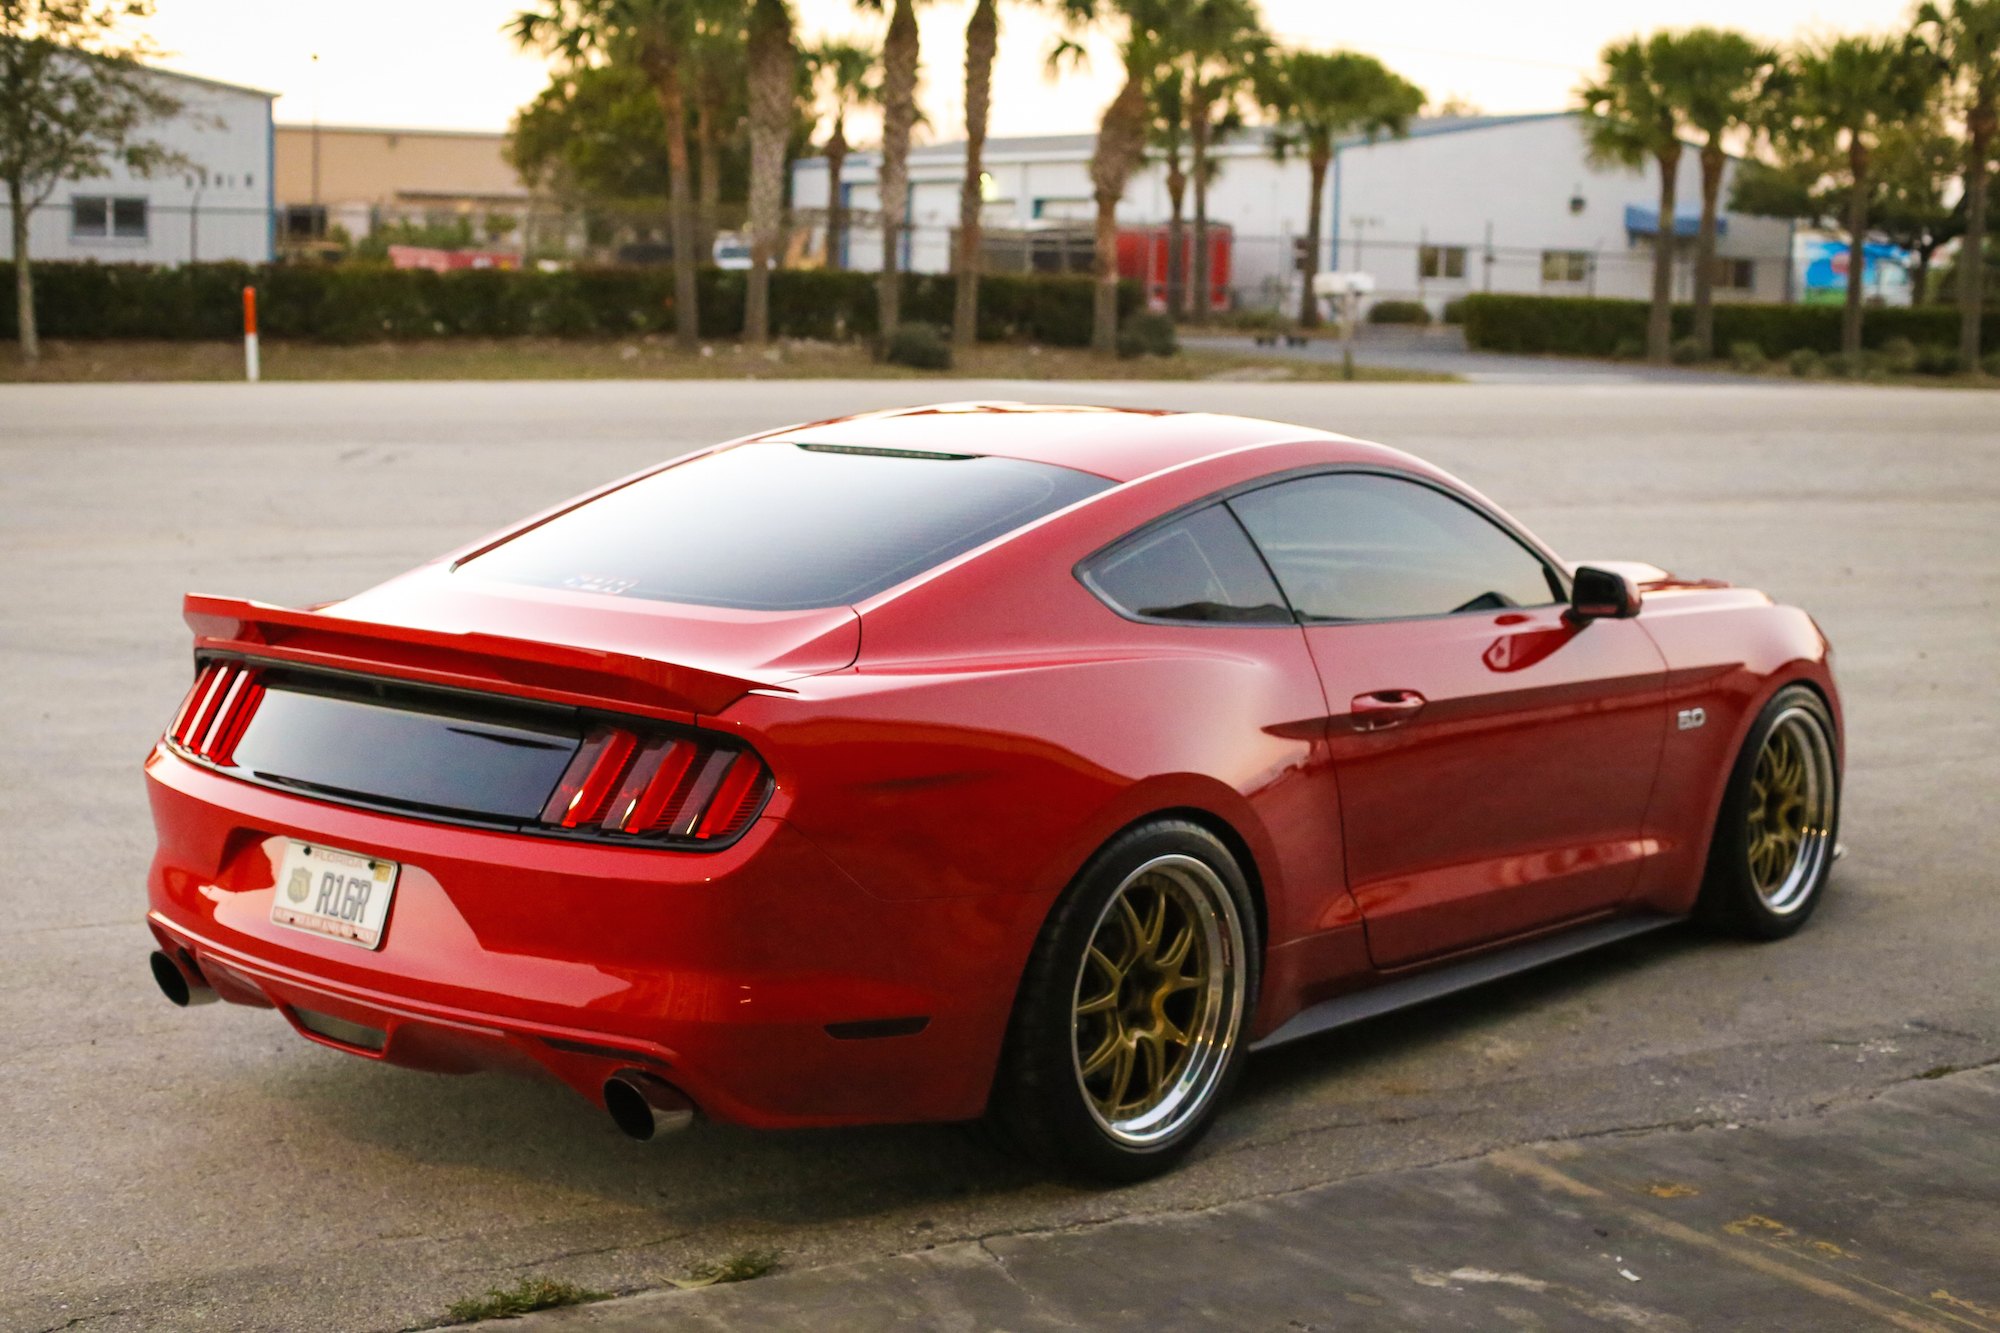 Rear Lip Spoiler on Red Ford Mustang 5.0 - Photo by Forgeline Motorsports